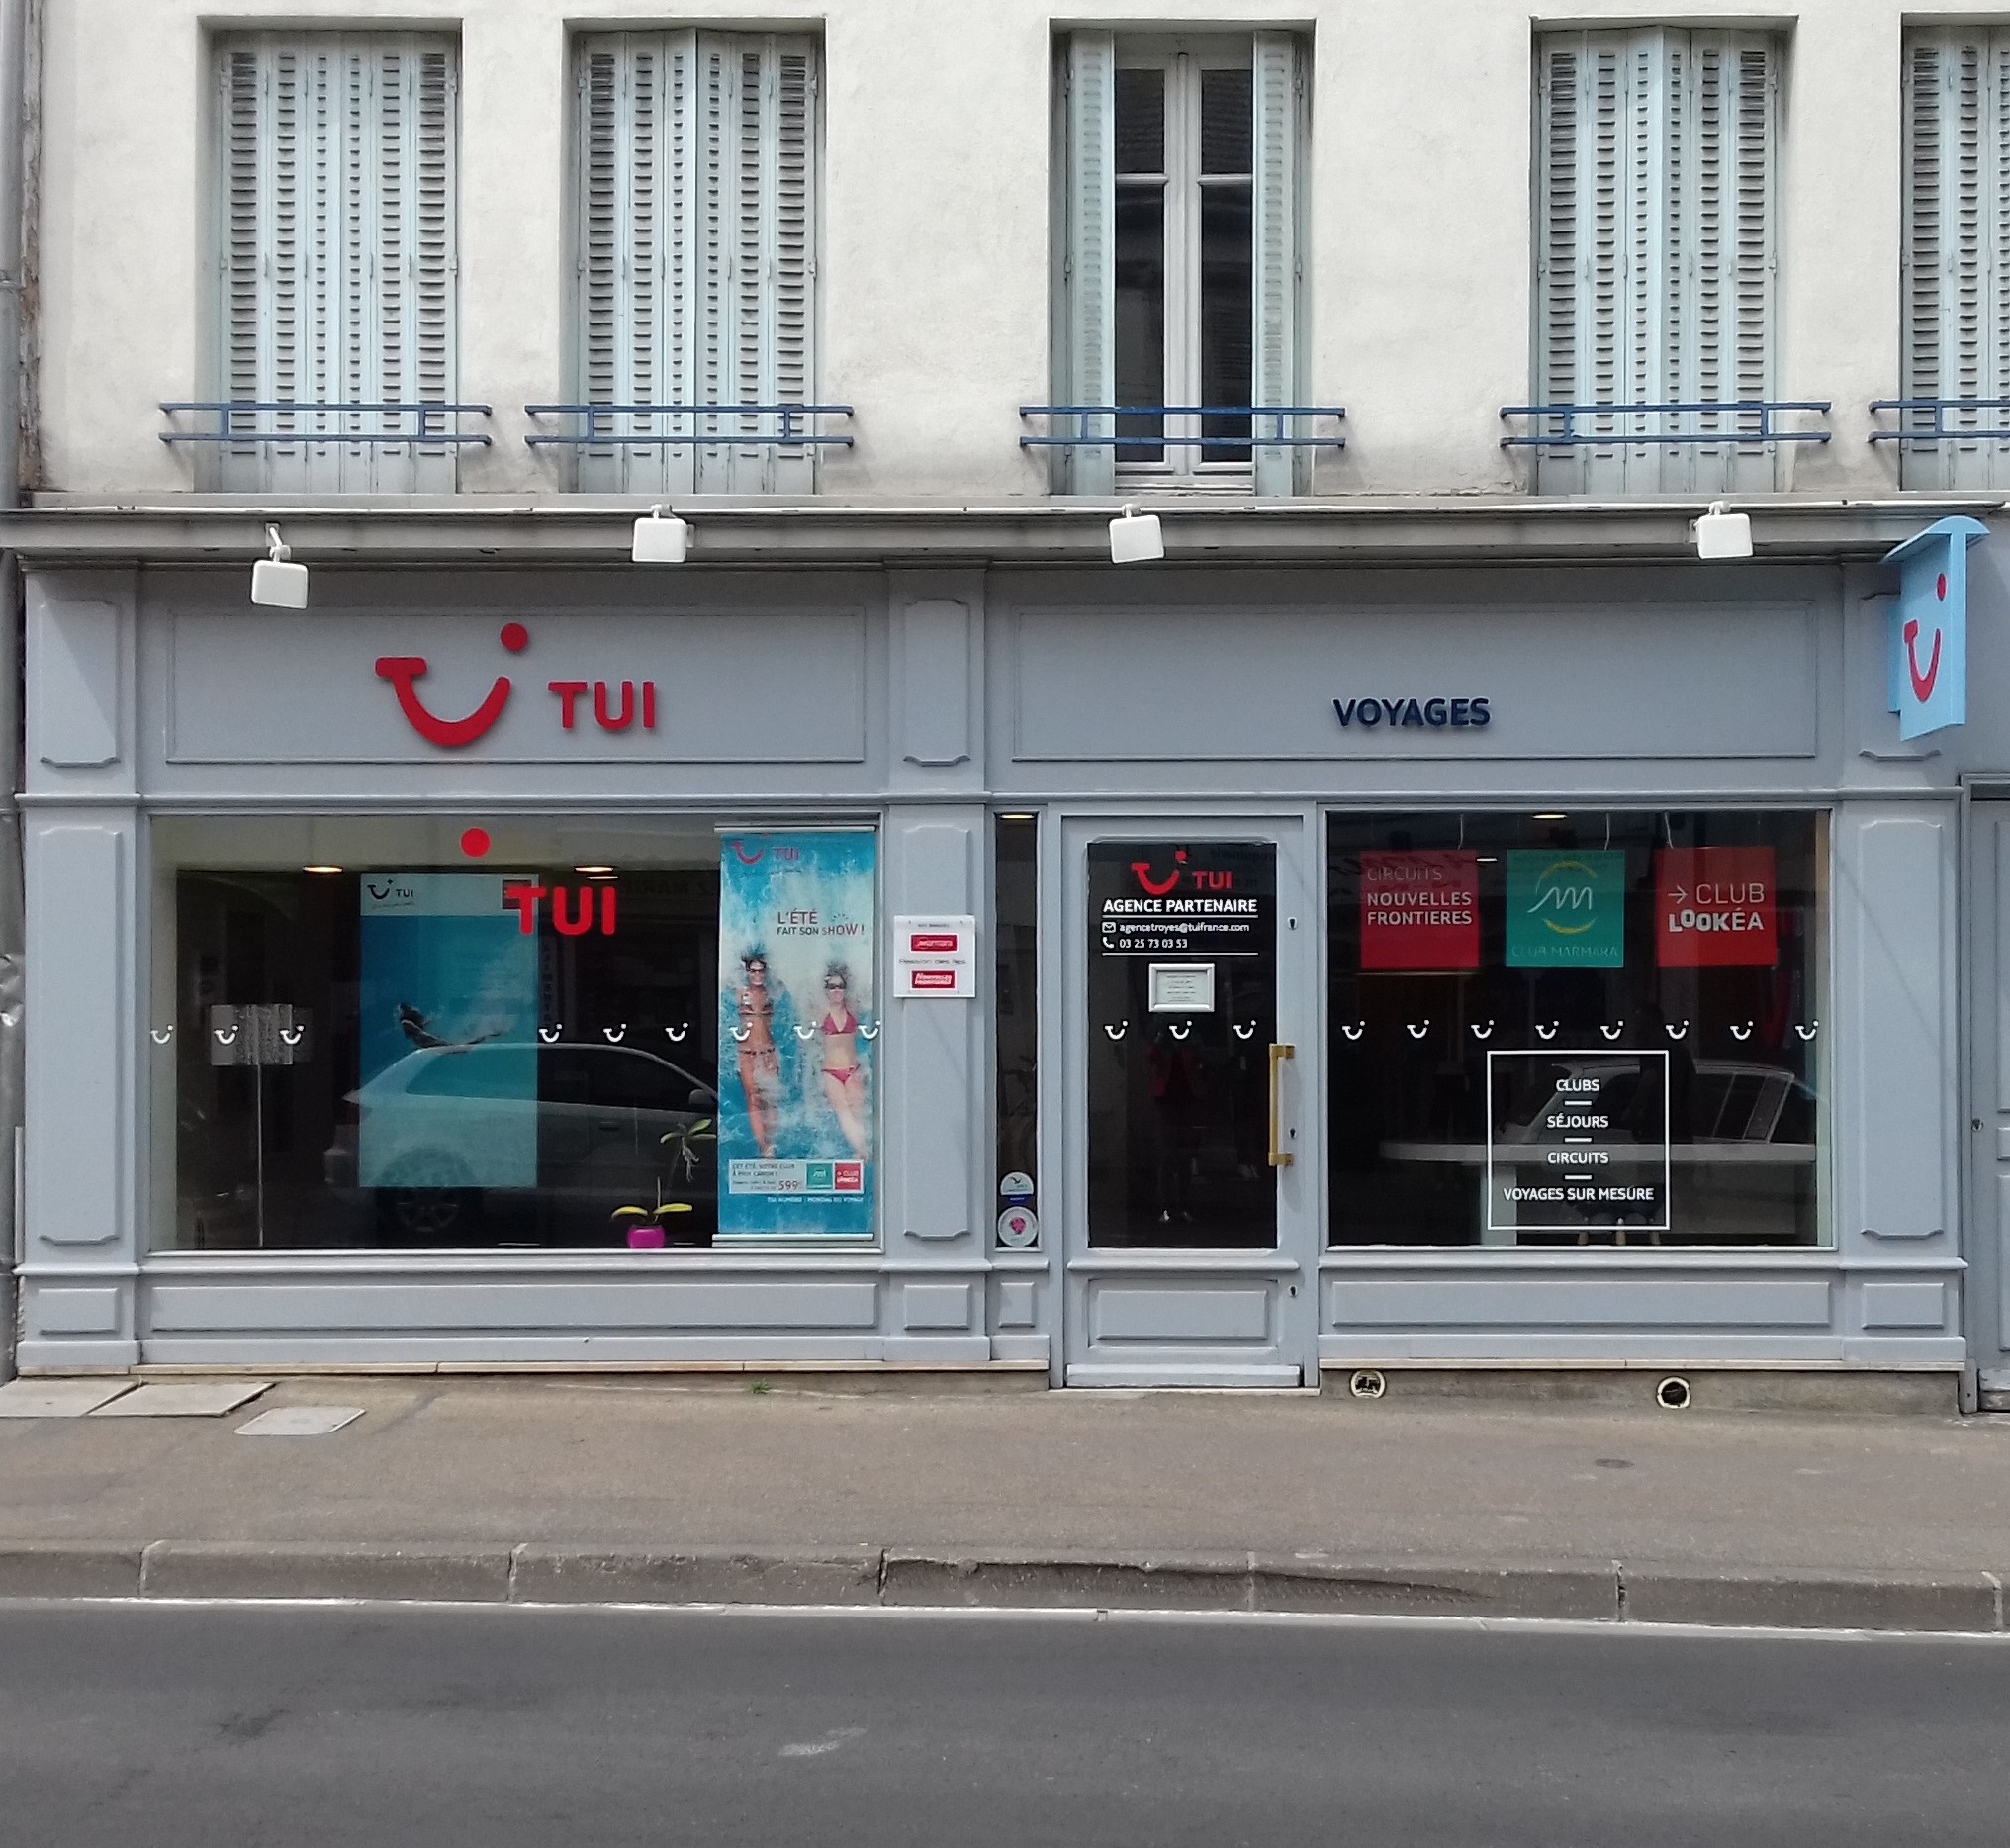  Agence  de  voyages  TUI STORE  Troyes TUI